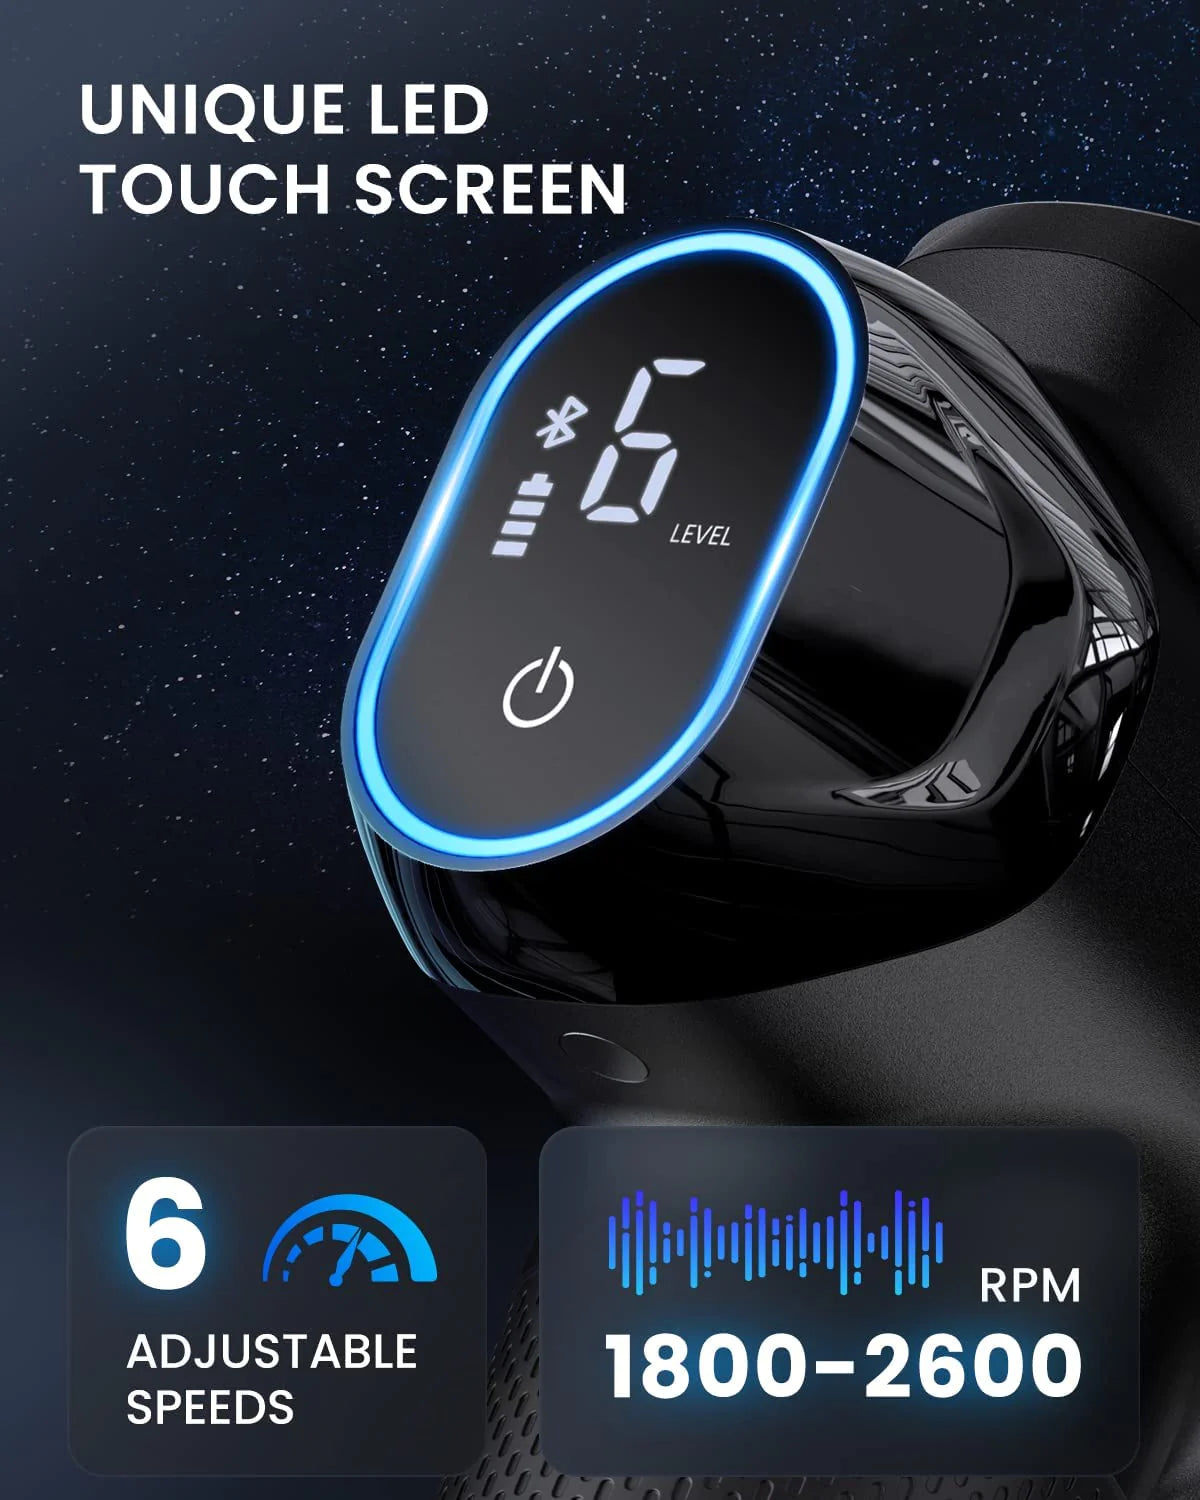 The image depicts a modern fitness device with a LED touch screen showing a battery icon, power button, the number 6 indicating level, and surrounded by a glowing blue ring. Below are icons indicating the Renpho Power Massage Gun from Renpho EU.